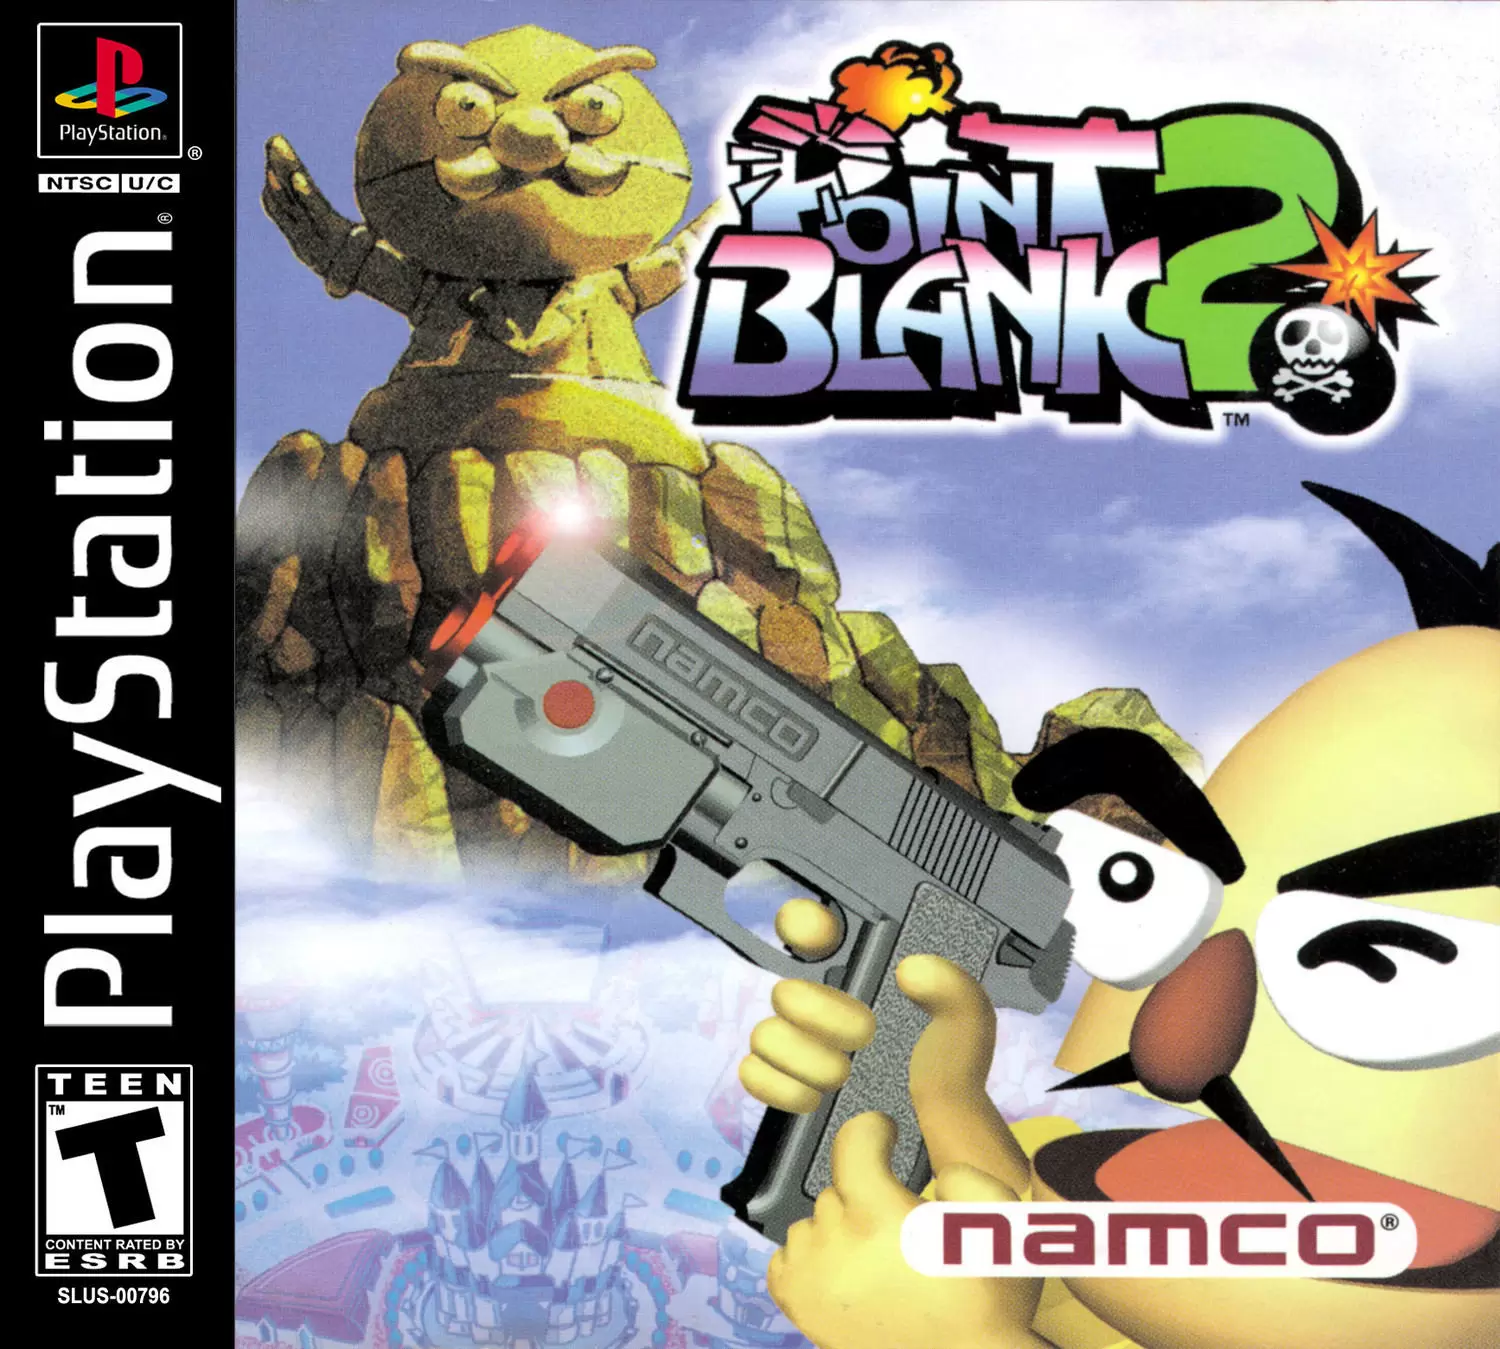 Playstation games - Point Blank 2